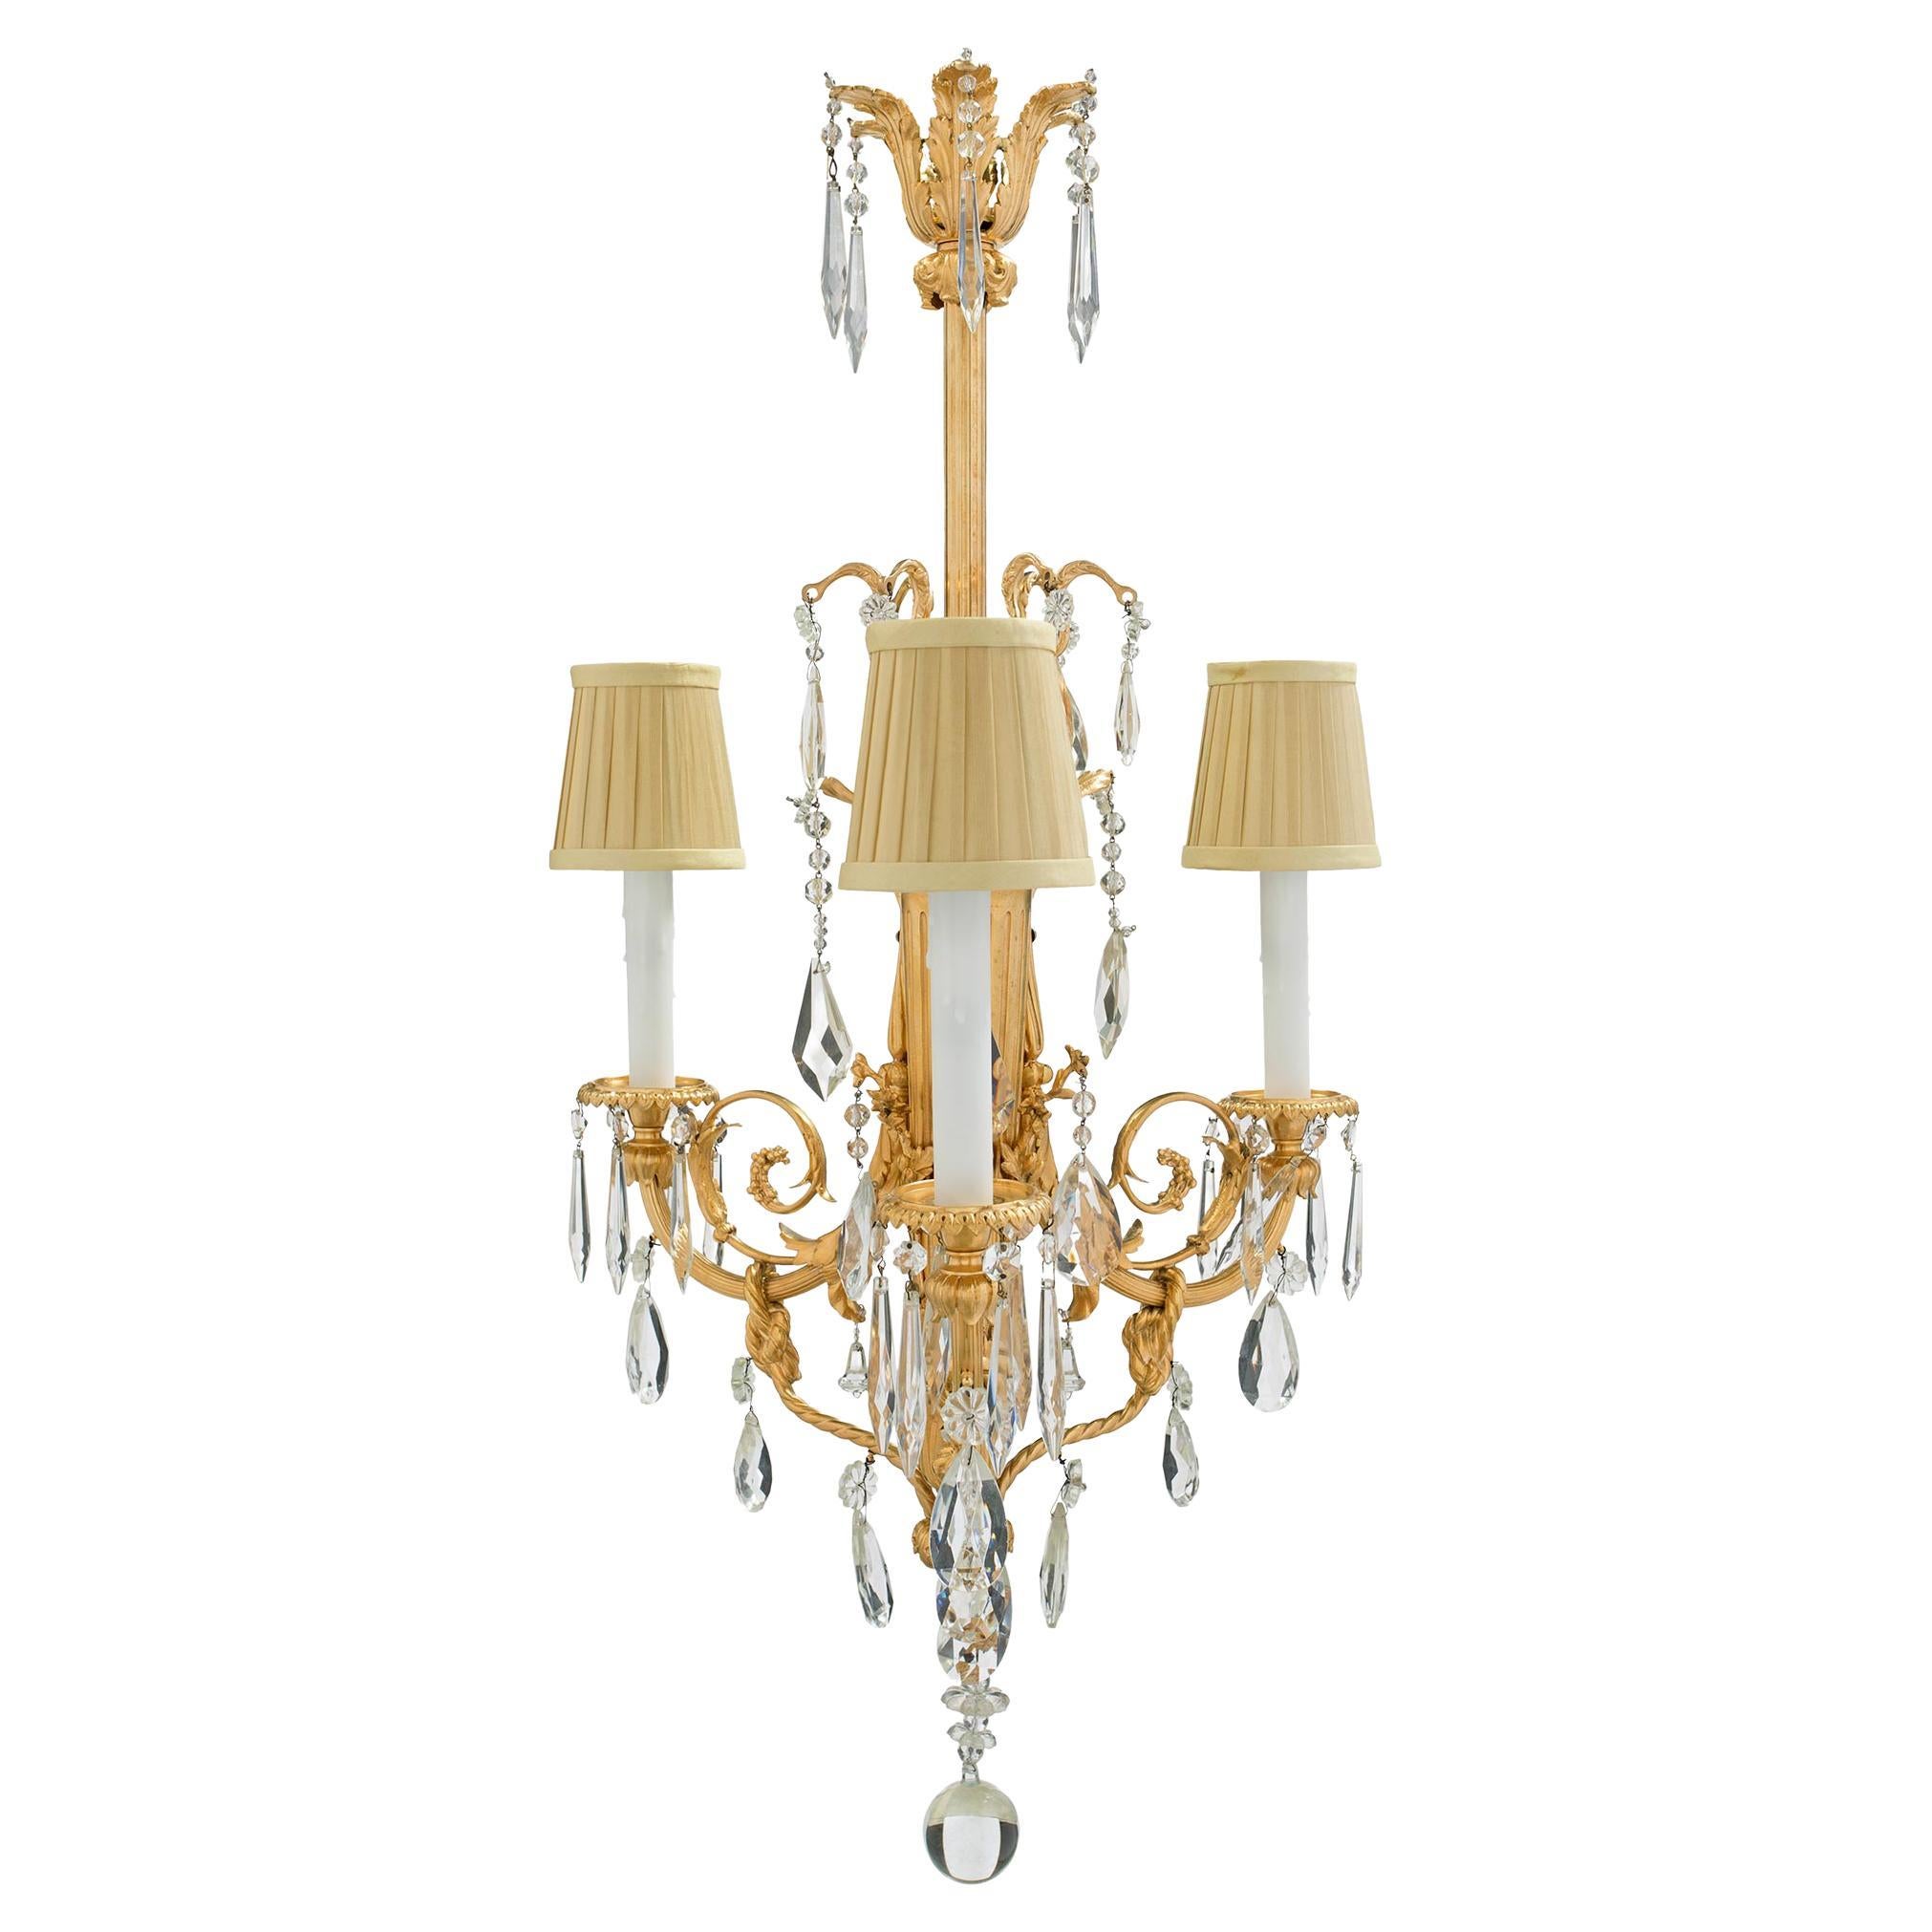 French 19th Century Louis XVI Style Baccarat Crystal and Ormolu Chandelier